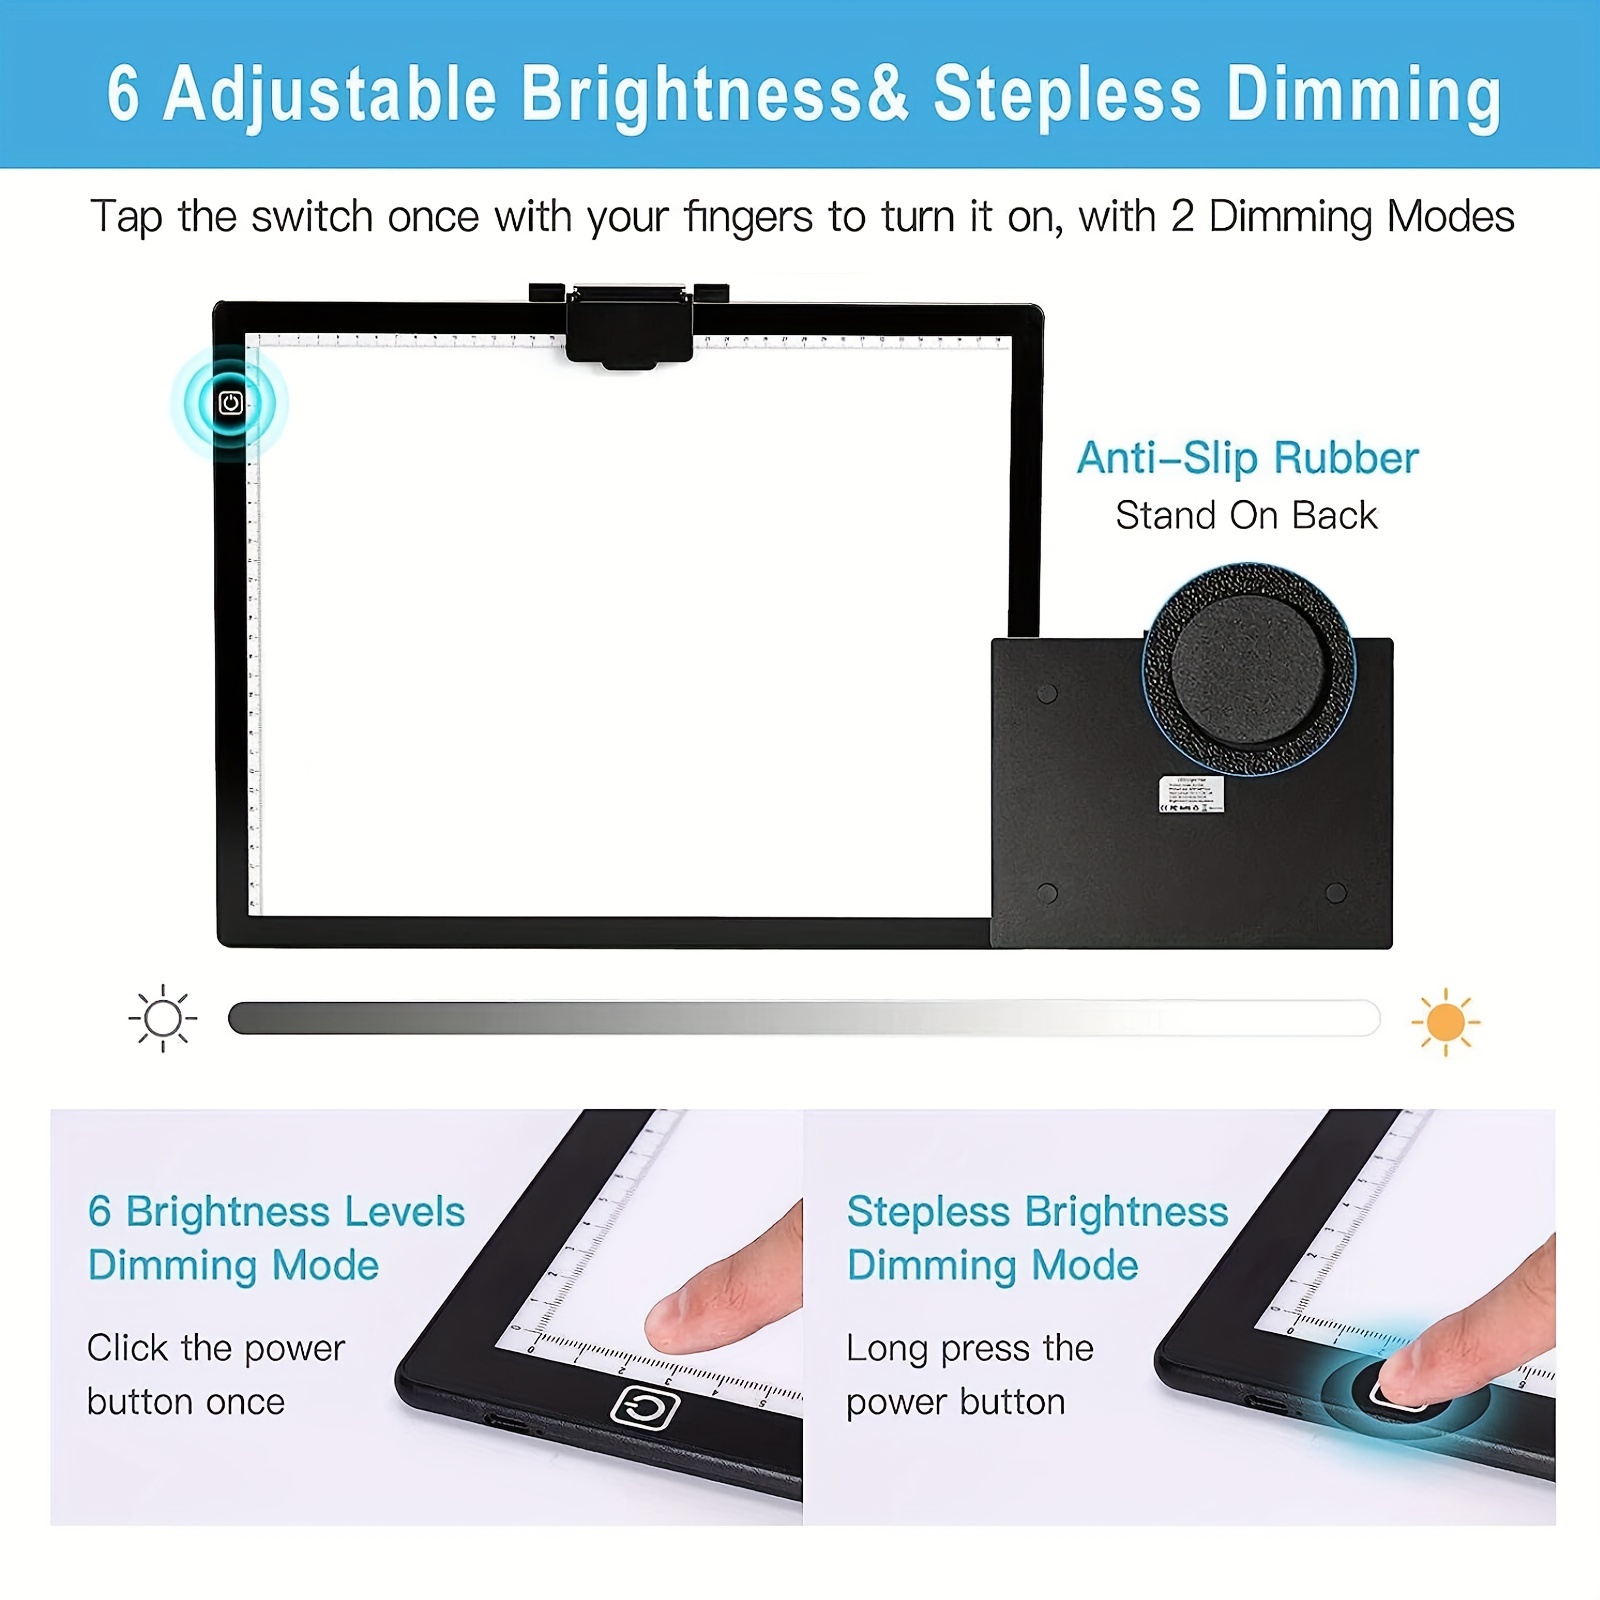 A3 Light Pad, Tracing Light Box 3 Colors Mode Stepless A3 Cordless with  Stand